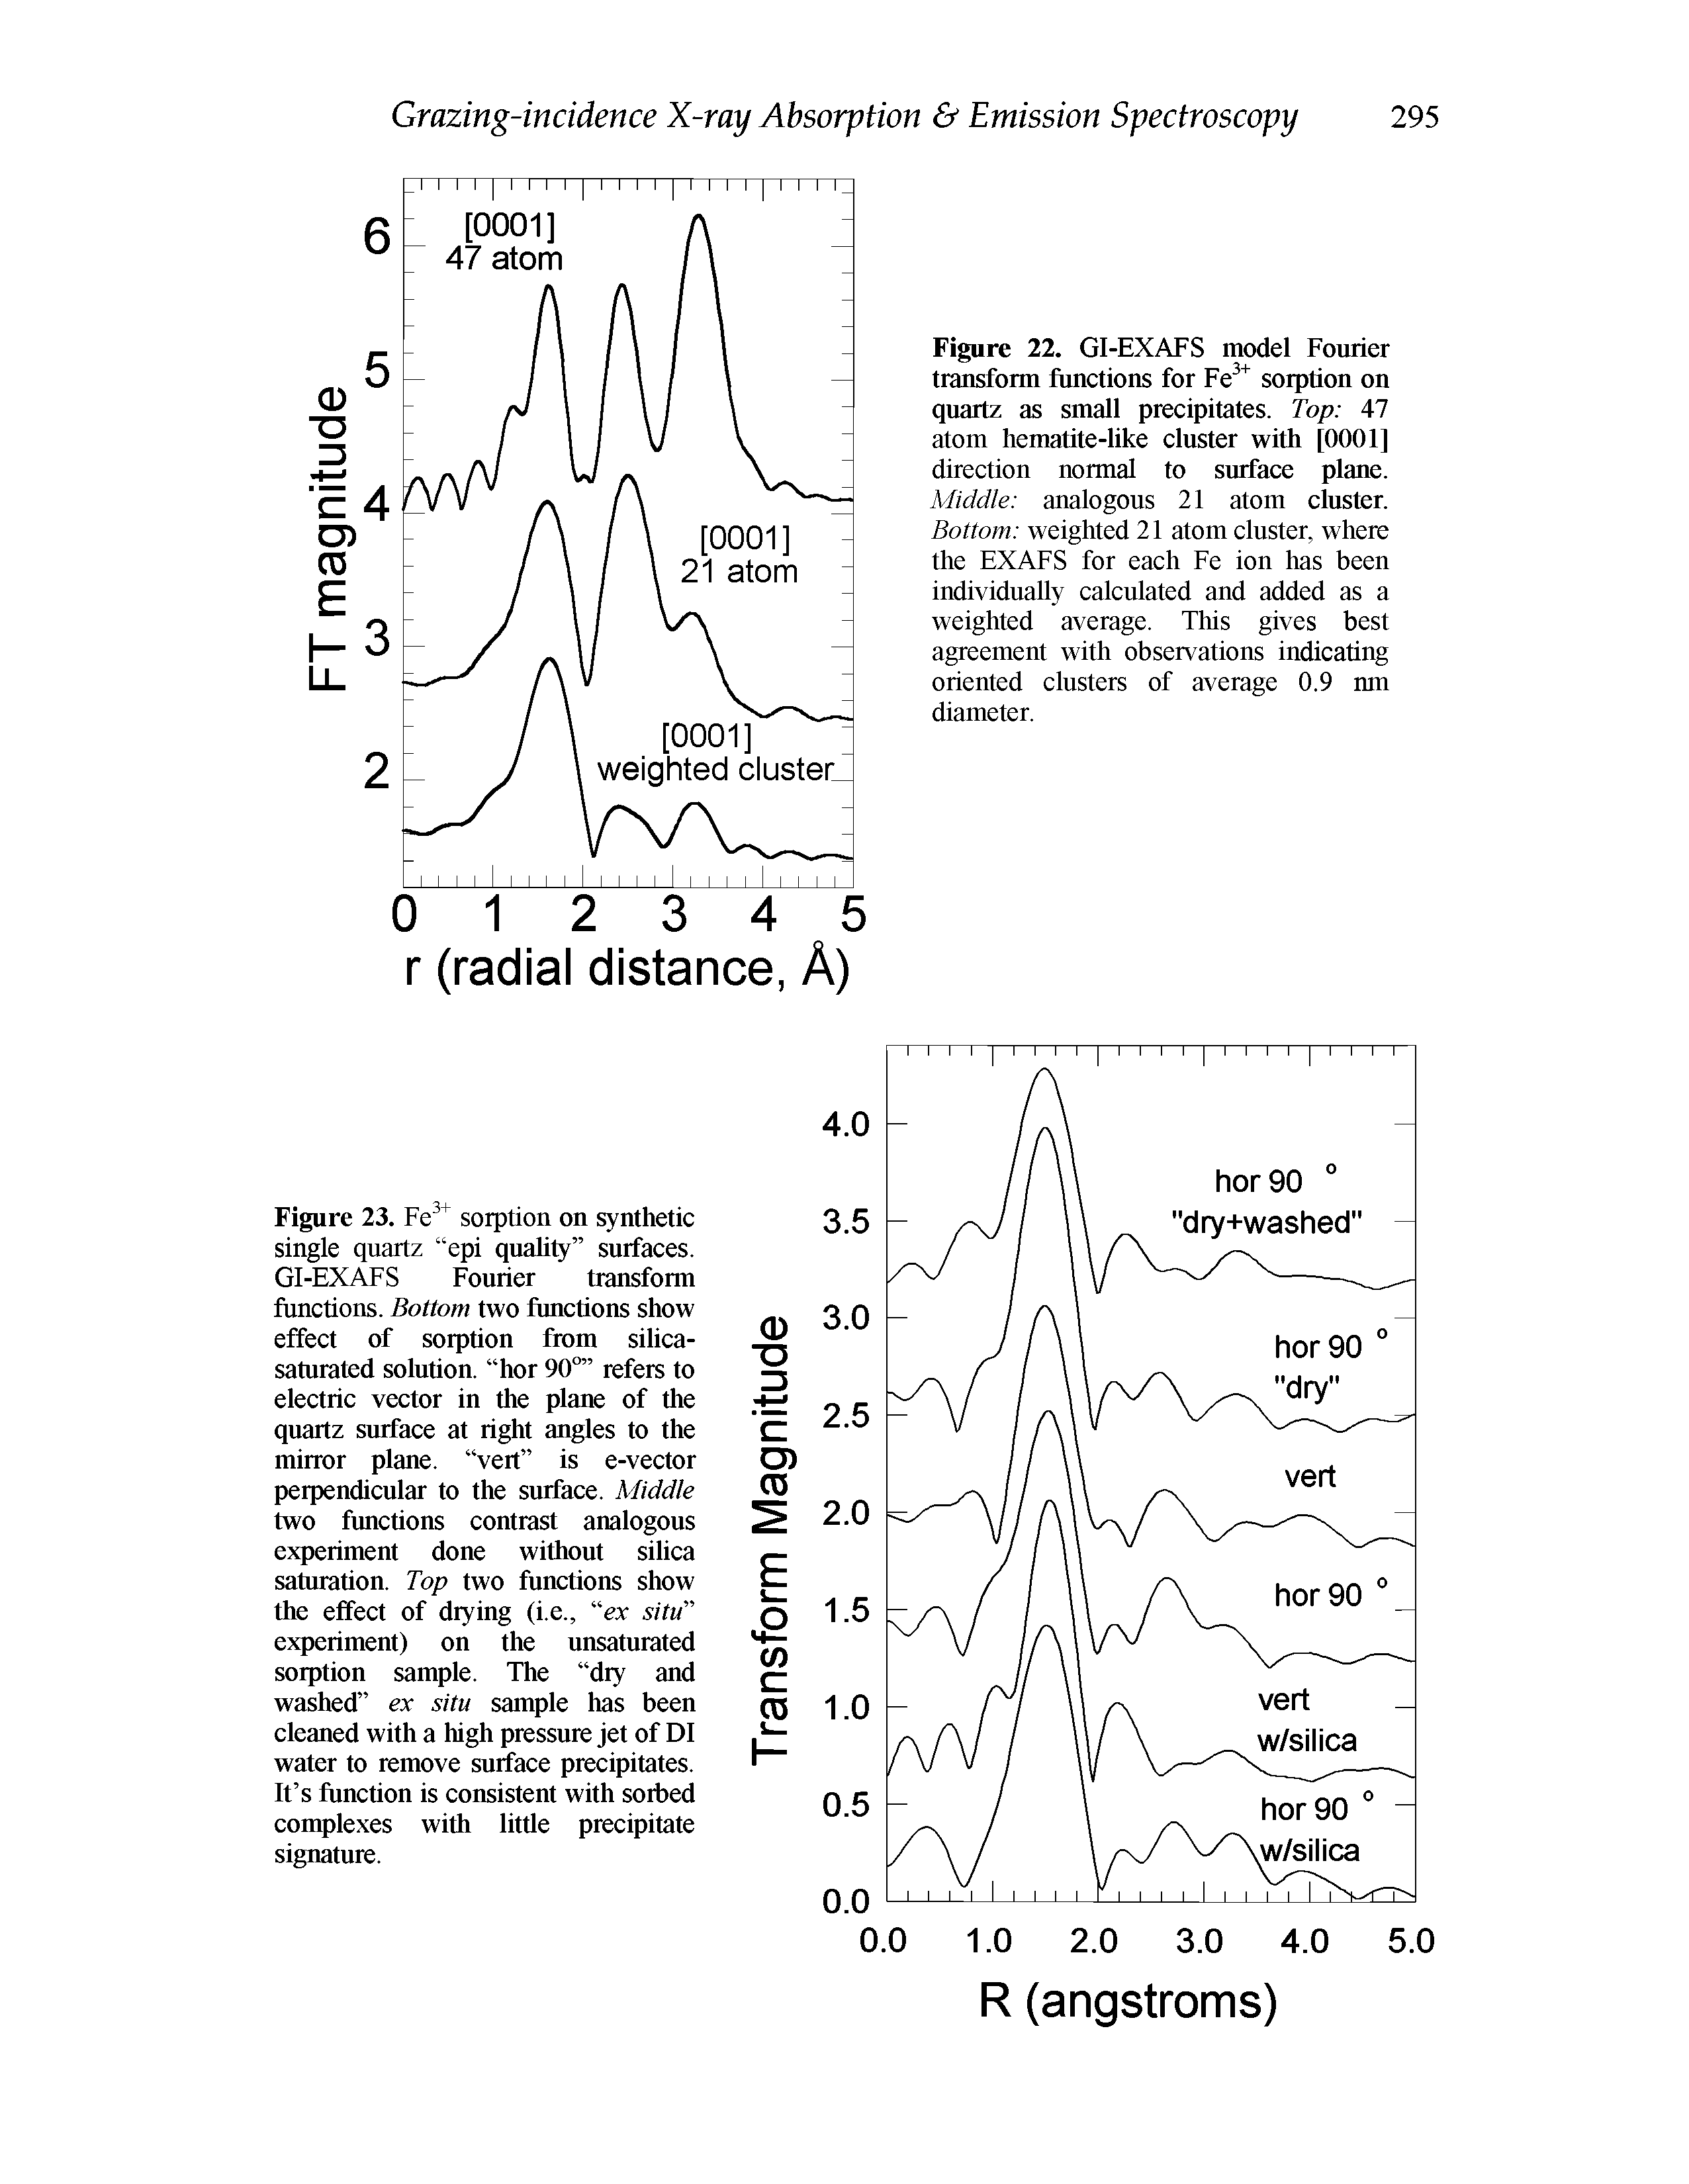 Figure 23. Fc sorption on synthetic single quartz epi quality surfaces. GI-EXAFS Fourier transform functions. Bottom two functions show effect of sorption from silica-saturated solution, hor 90 refers to electric vector in the plane of the quartz surface at right angles to the mirror plane, vert is e-vector perpendicular to the surface. Middle two functions contrast analogous experiment done without silica saturation. Top two functions show the effect of diying (i.e., ex situ experiment) on the unsaturated sorption sample. The diy and washed ex situ sample has been cleaned with a high pressure jet of DI water to remove surface precipitates. It s function is consistent with soibed complexes with little precipitate signature.